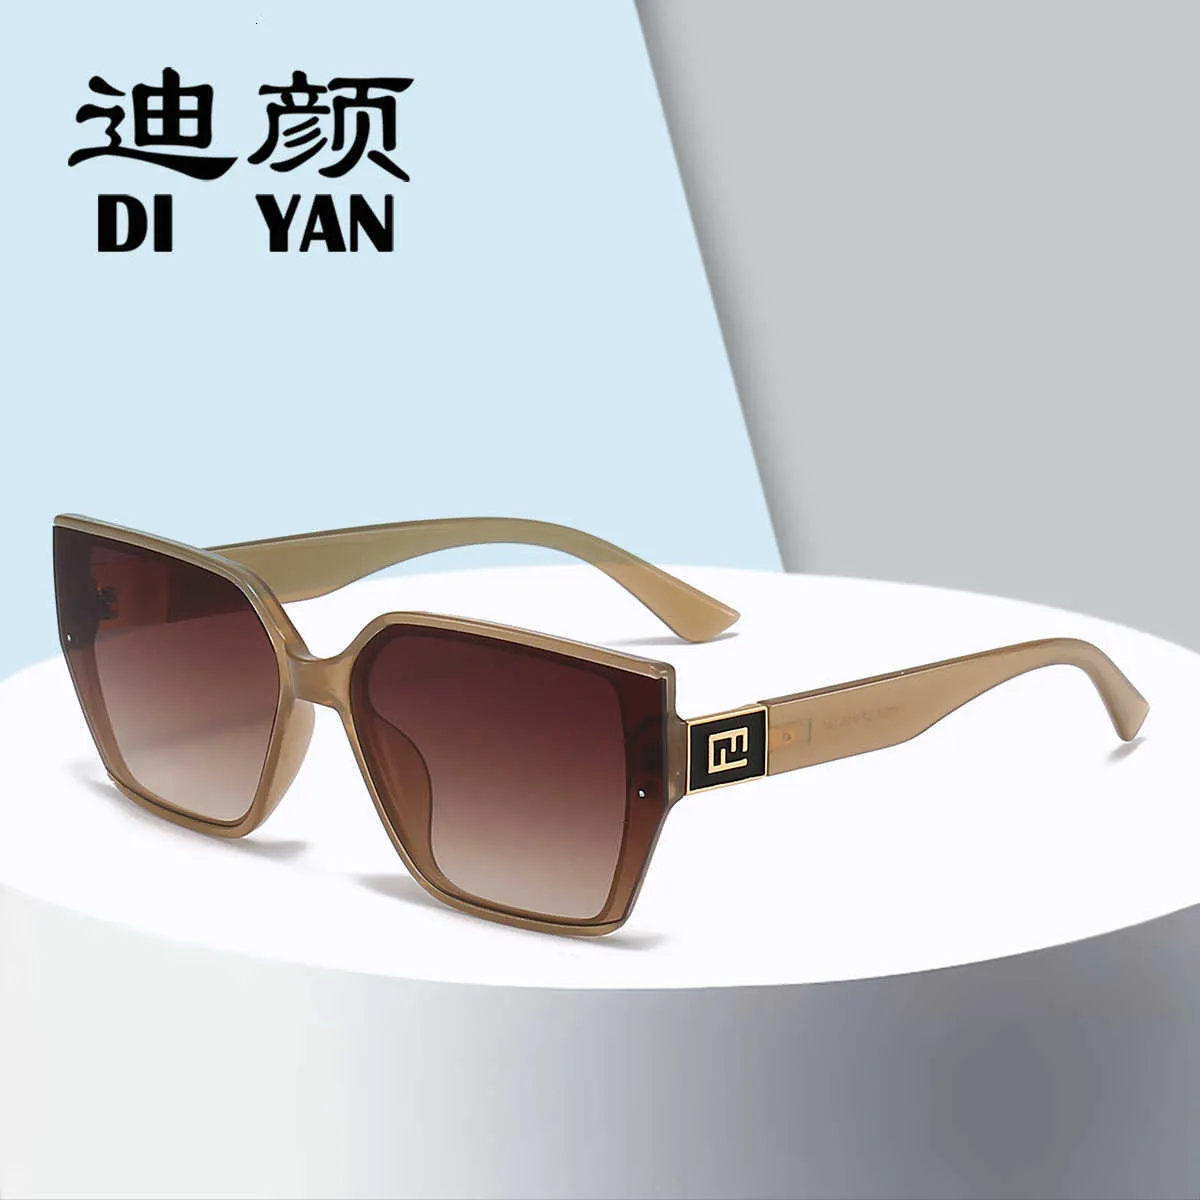 F Letter Sunglasses fund New ashion Large rame Personalized Trend amily an Wanghong Showcase Street Photo Glasses